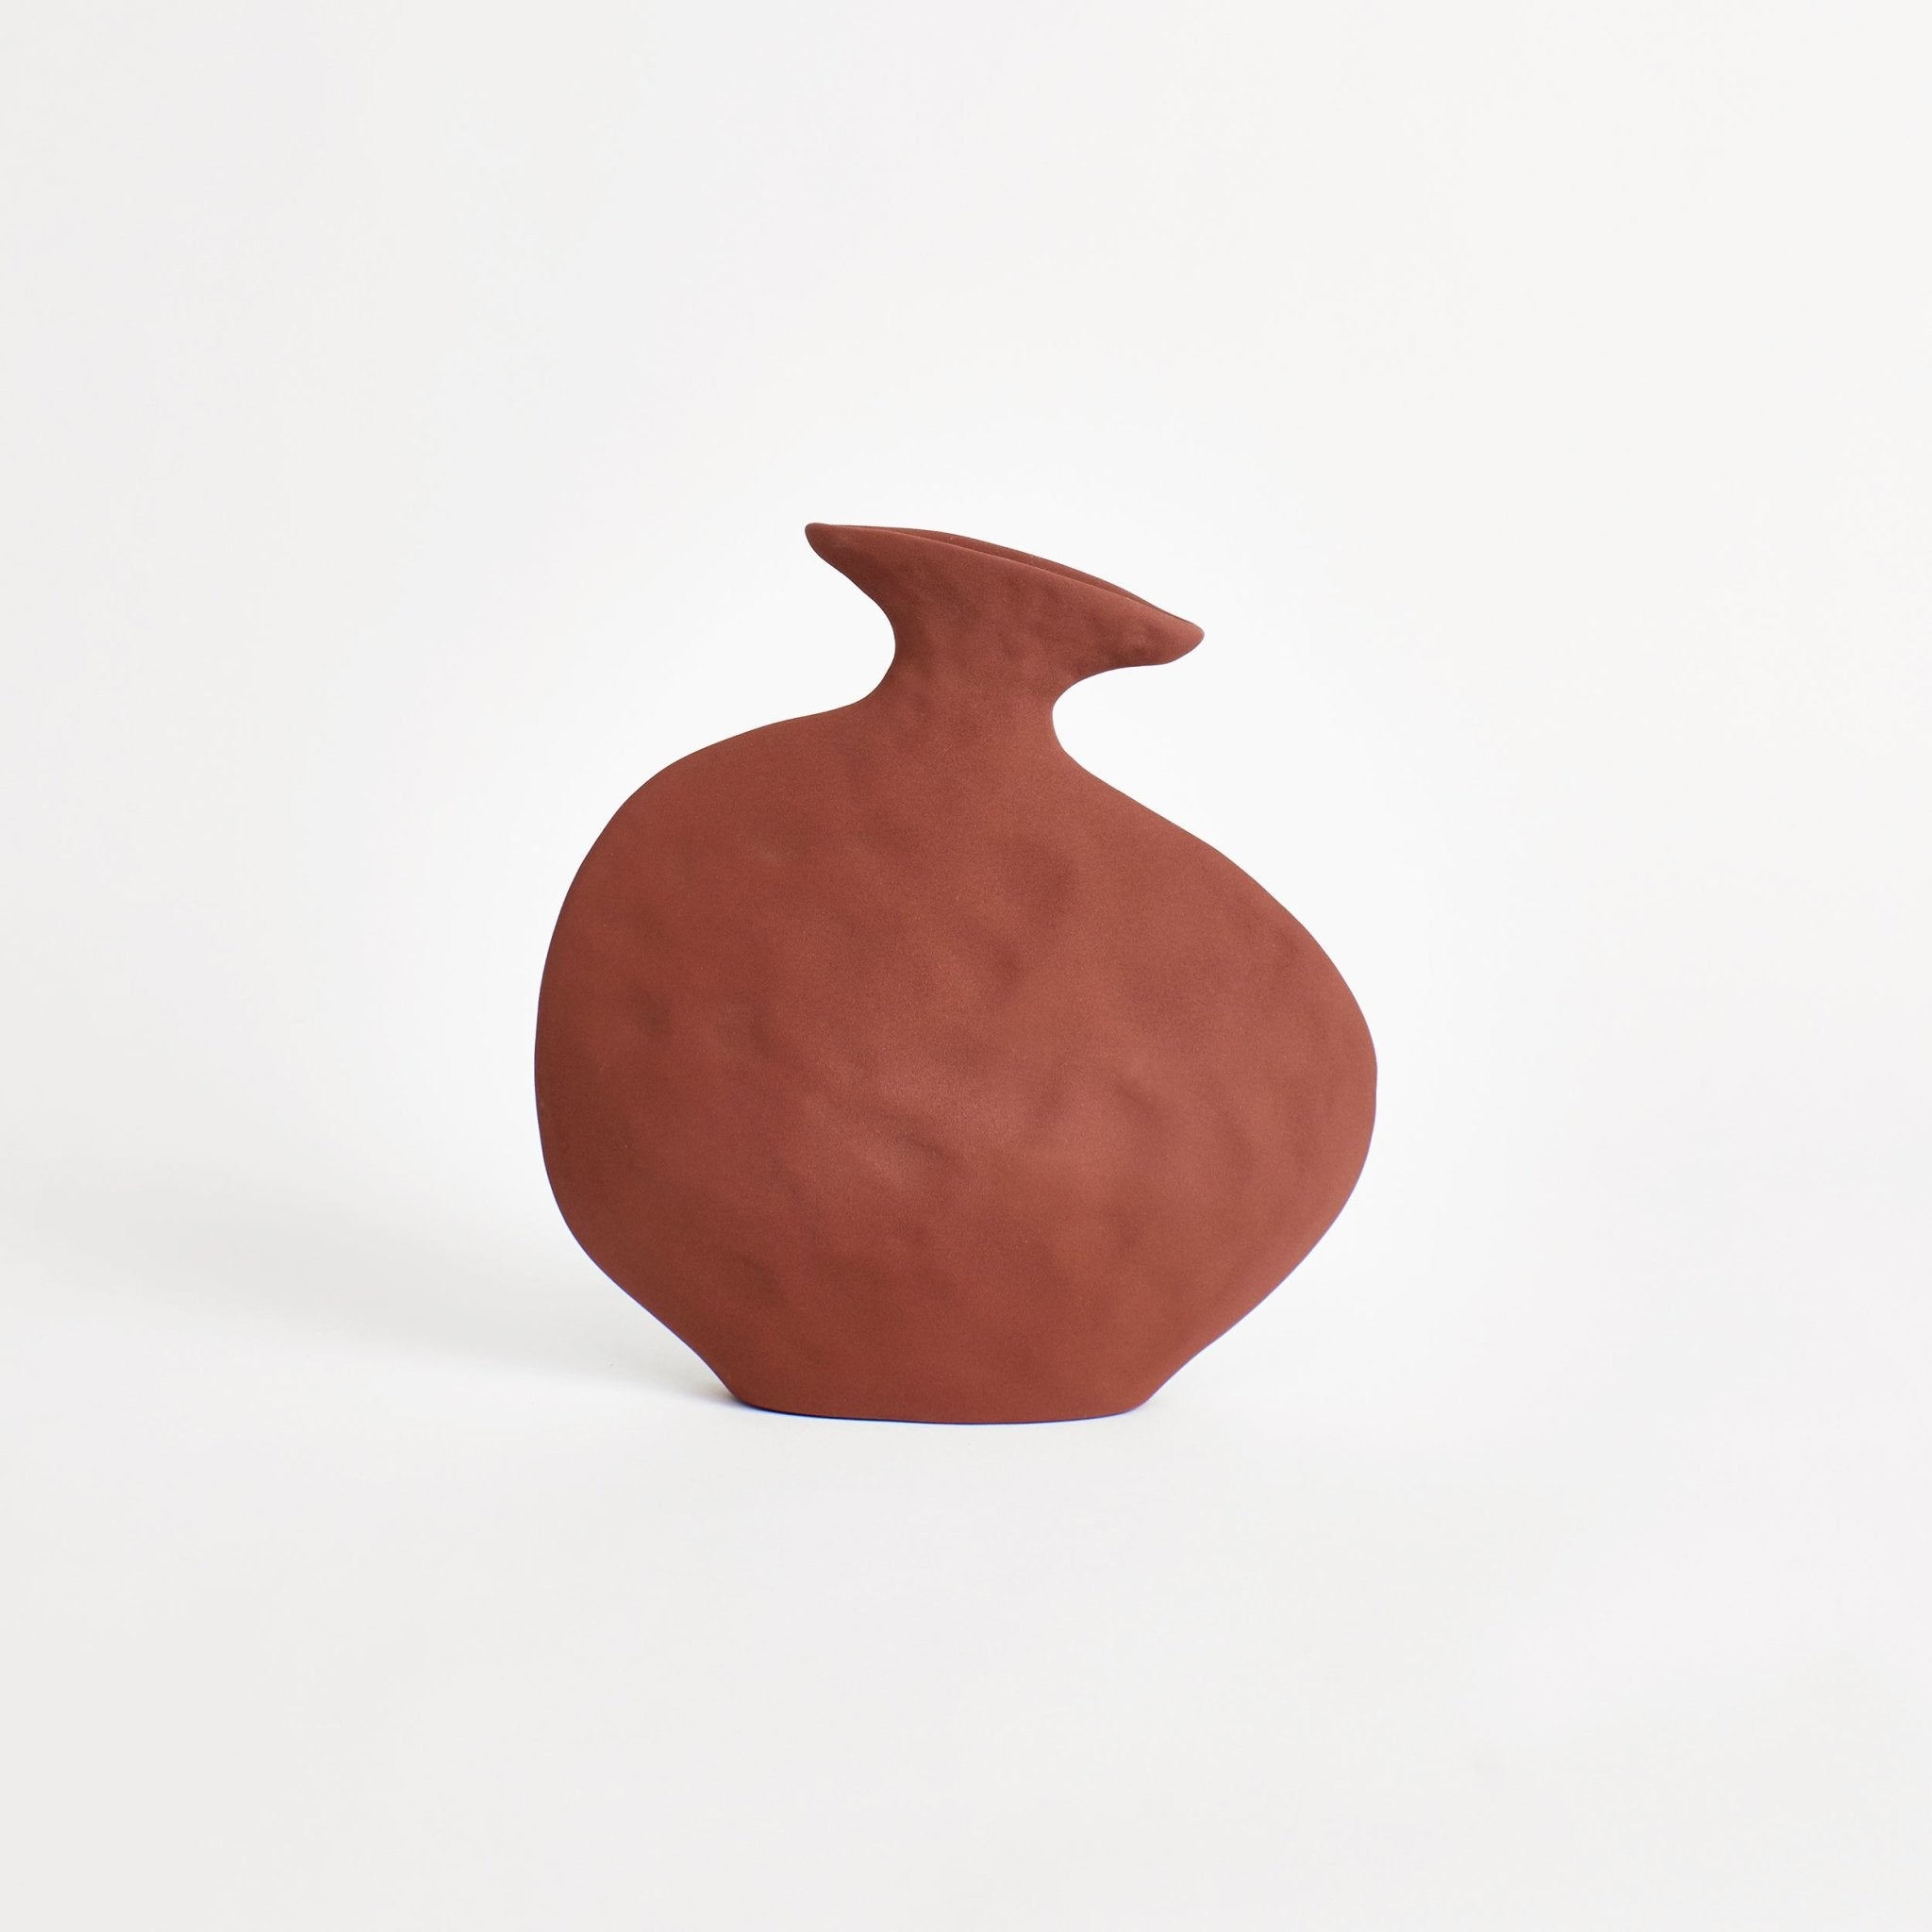 Flat Vase - Brick vase from Project 213A